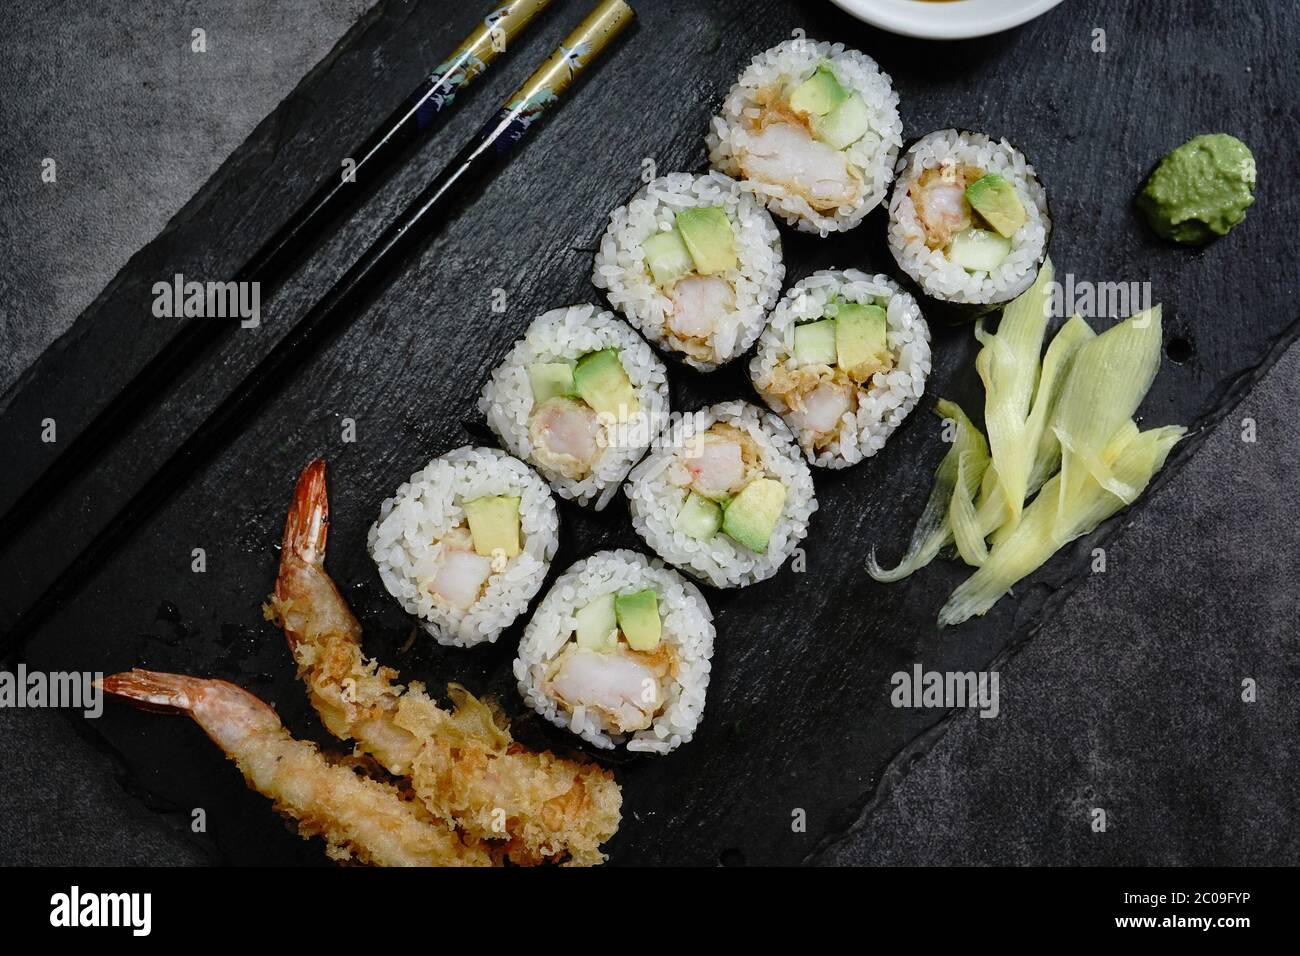 Homemade Shrimp tempura Sushi Roll, pickled ginger,wasabi and soy sauce  Stock Photo - Alamy